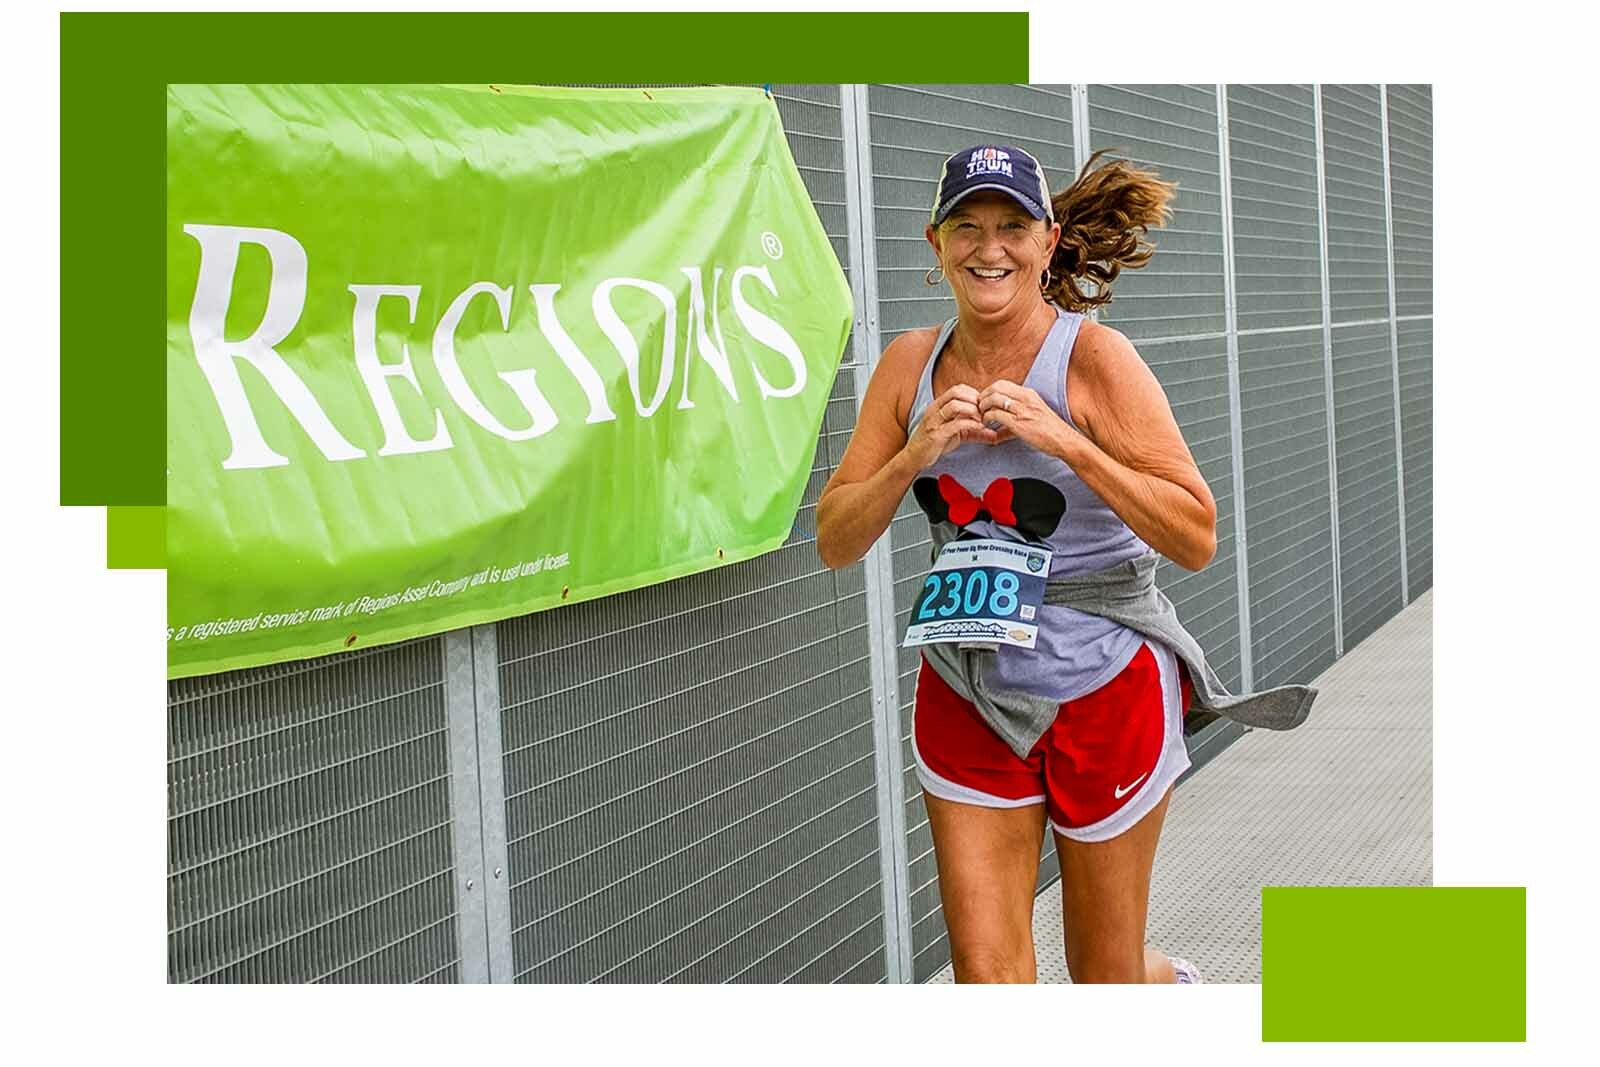 woman running next to a banner that says "Regions"